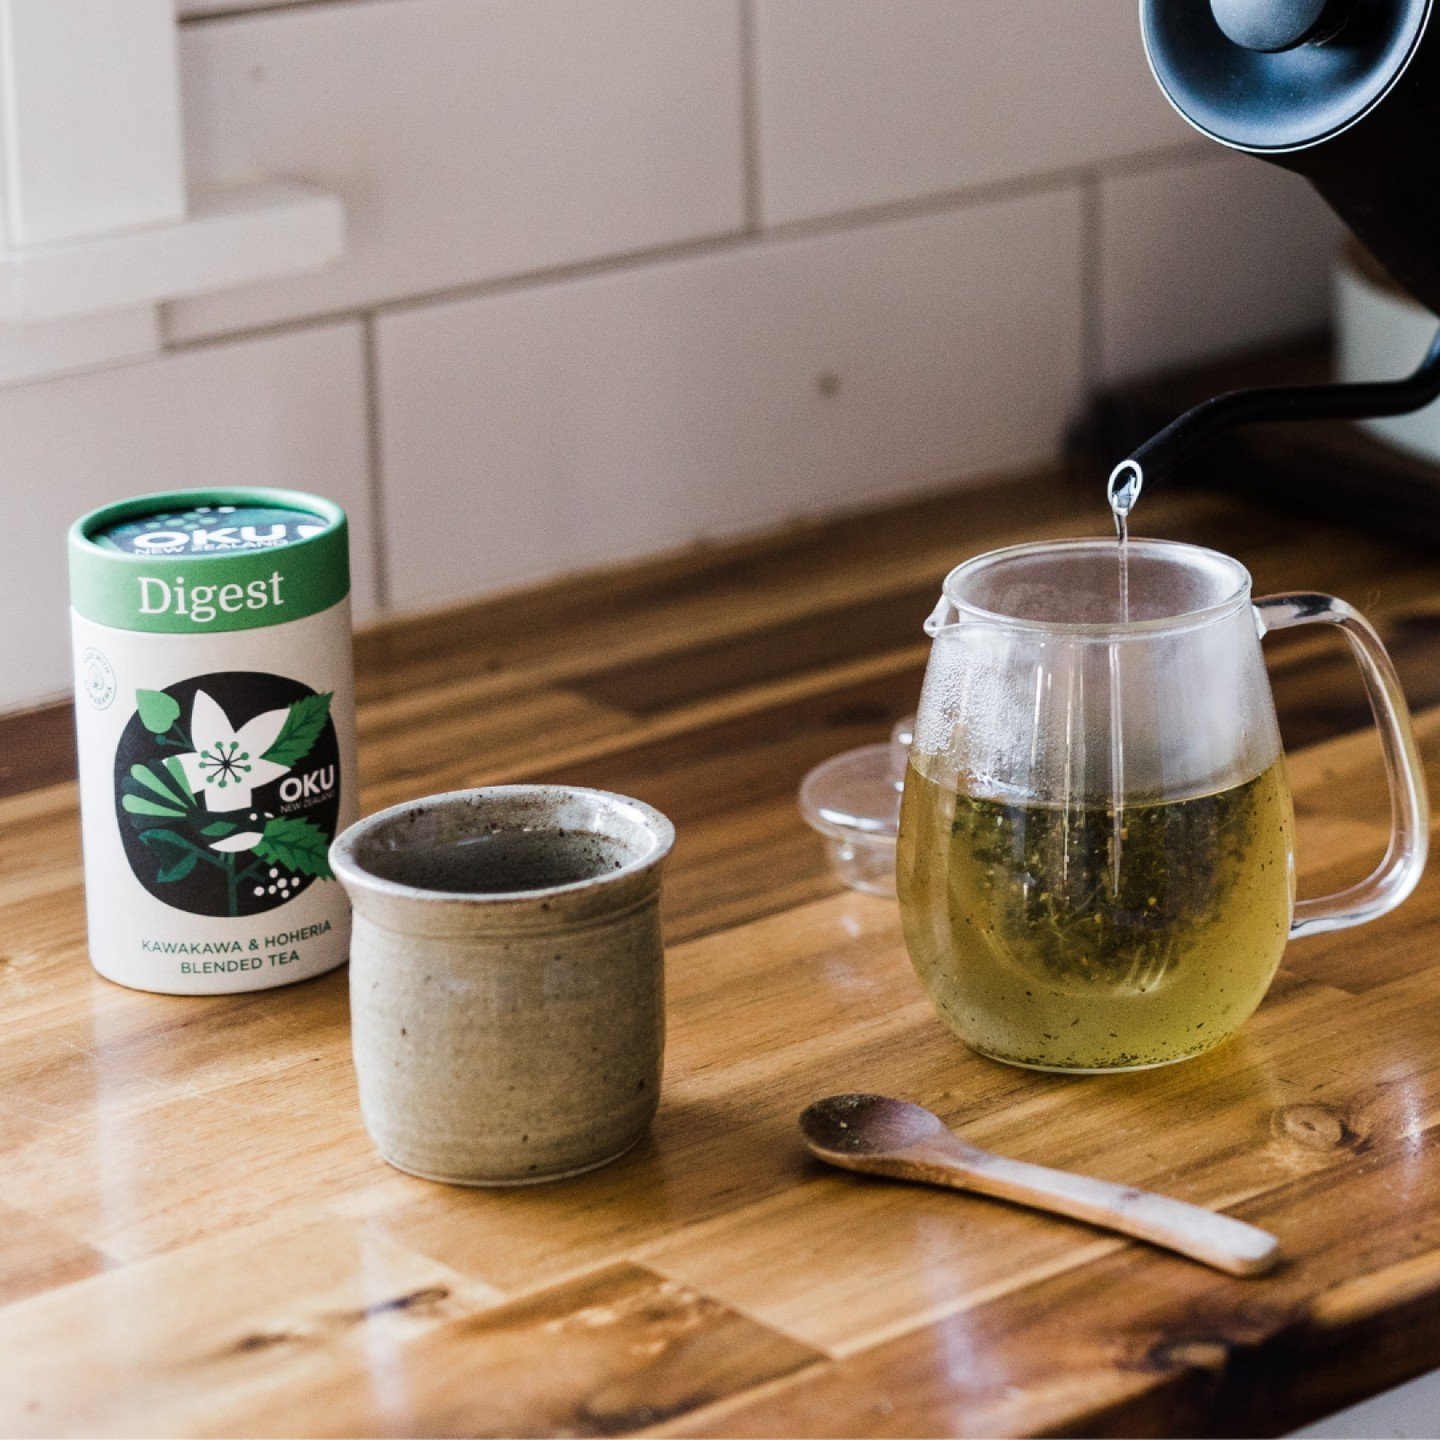 Revitalise your digestion with our Digest Tea, a comforting brew that's perfect for any time of day, especially after meals. 

Crafted with care, this blend combines the nurturing qualities of Kawakawa with the remarkable soothing properties of Hoher